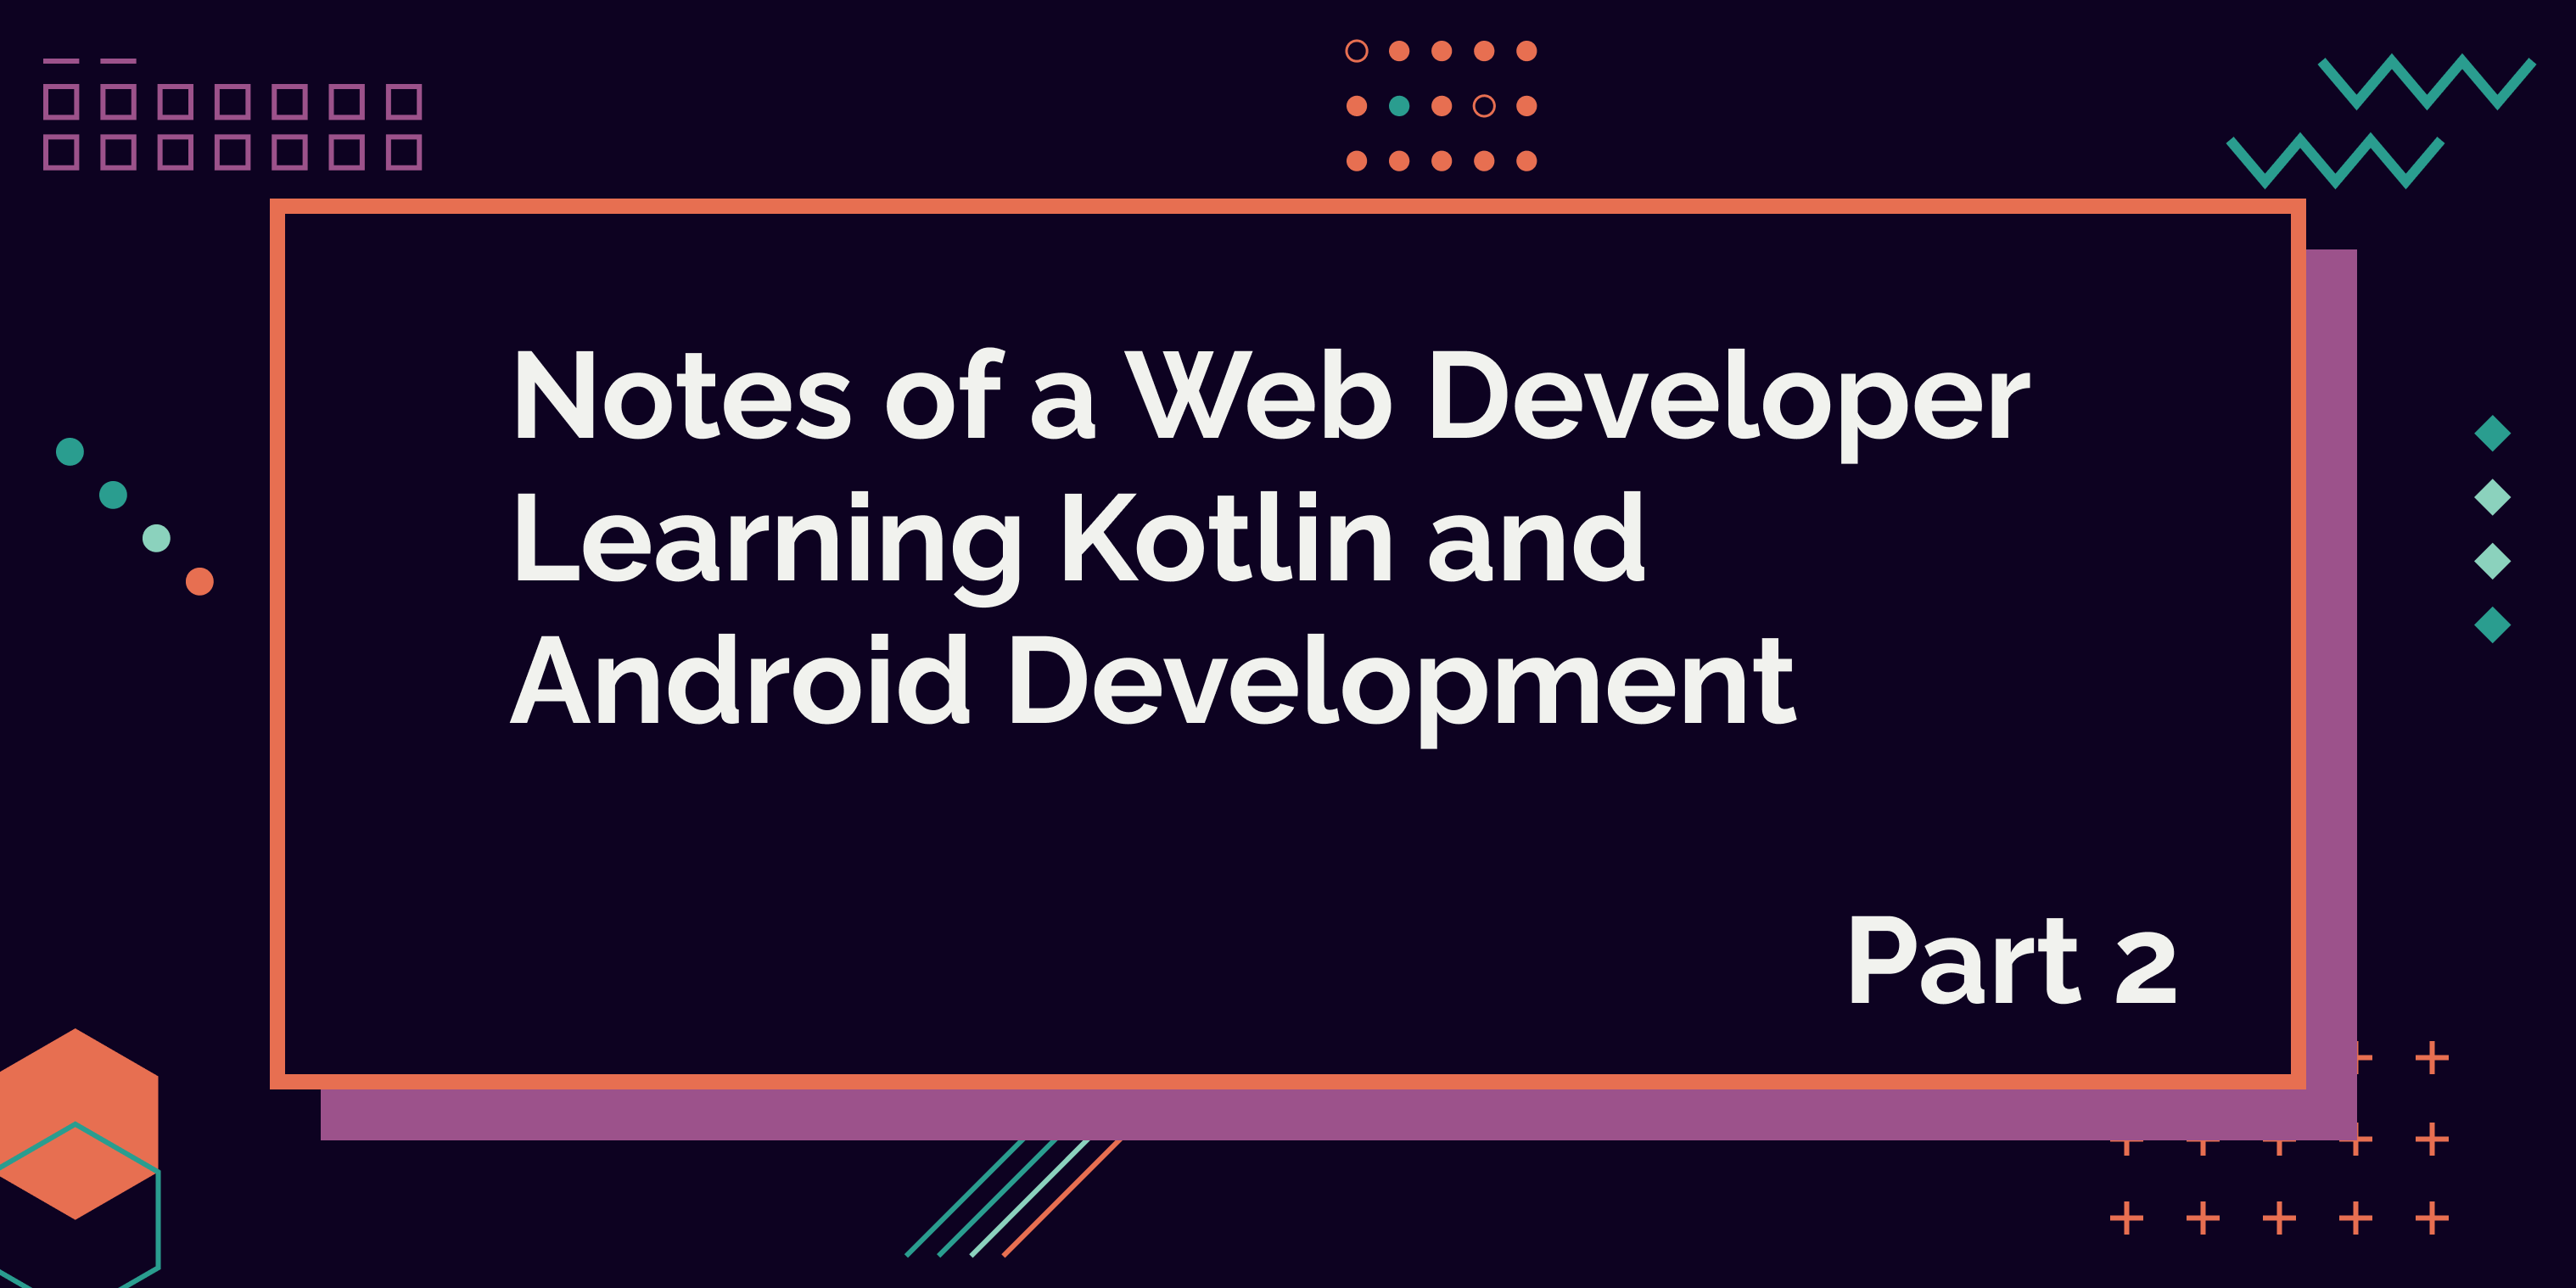 Notes of a web developer learning Kotlin and Android development - part 2.